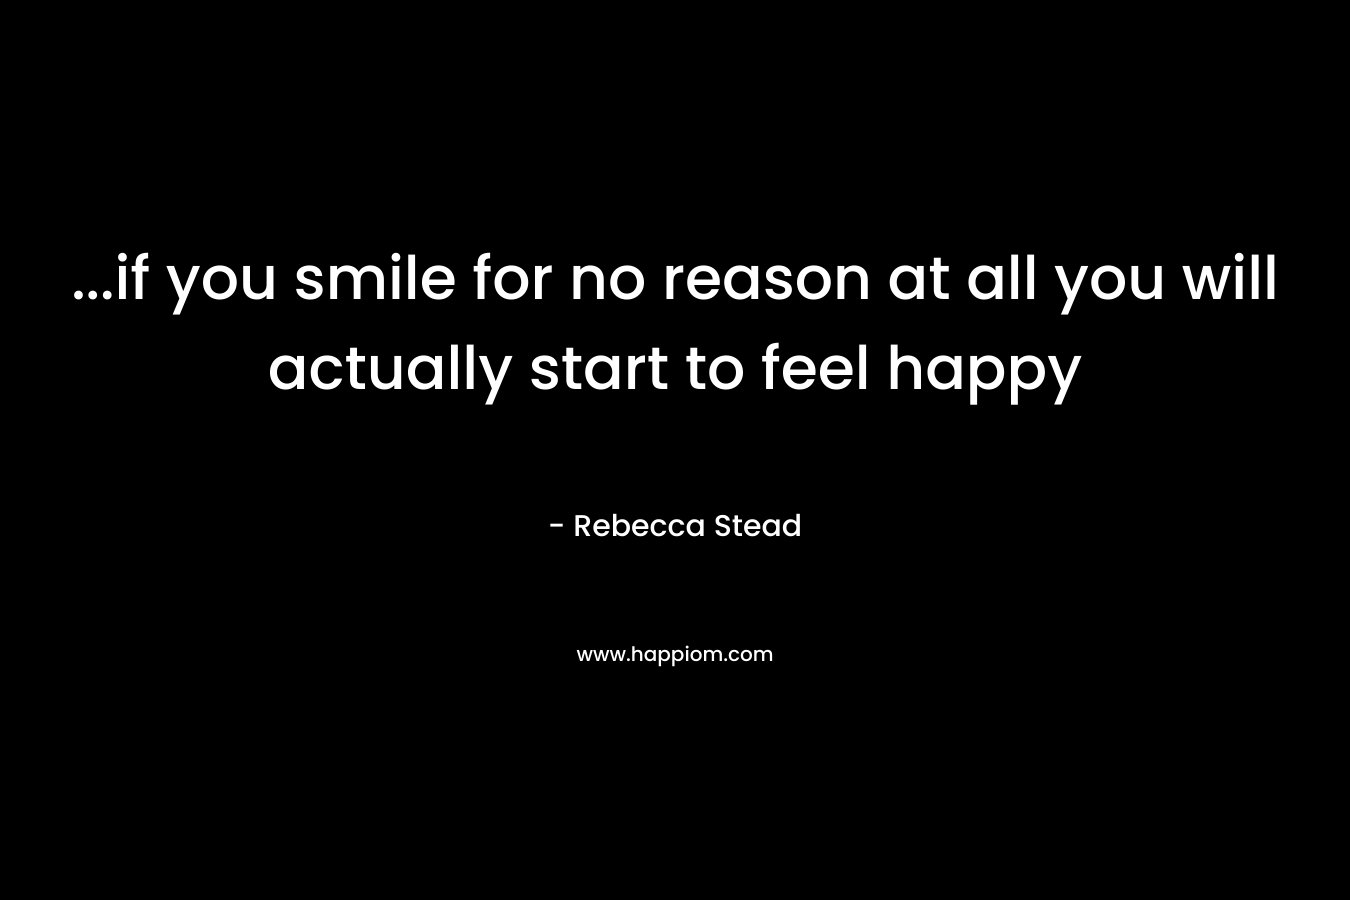 ...if you smile for no reason at all you will actually start to feel happy